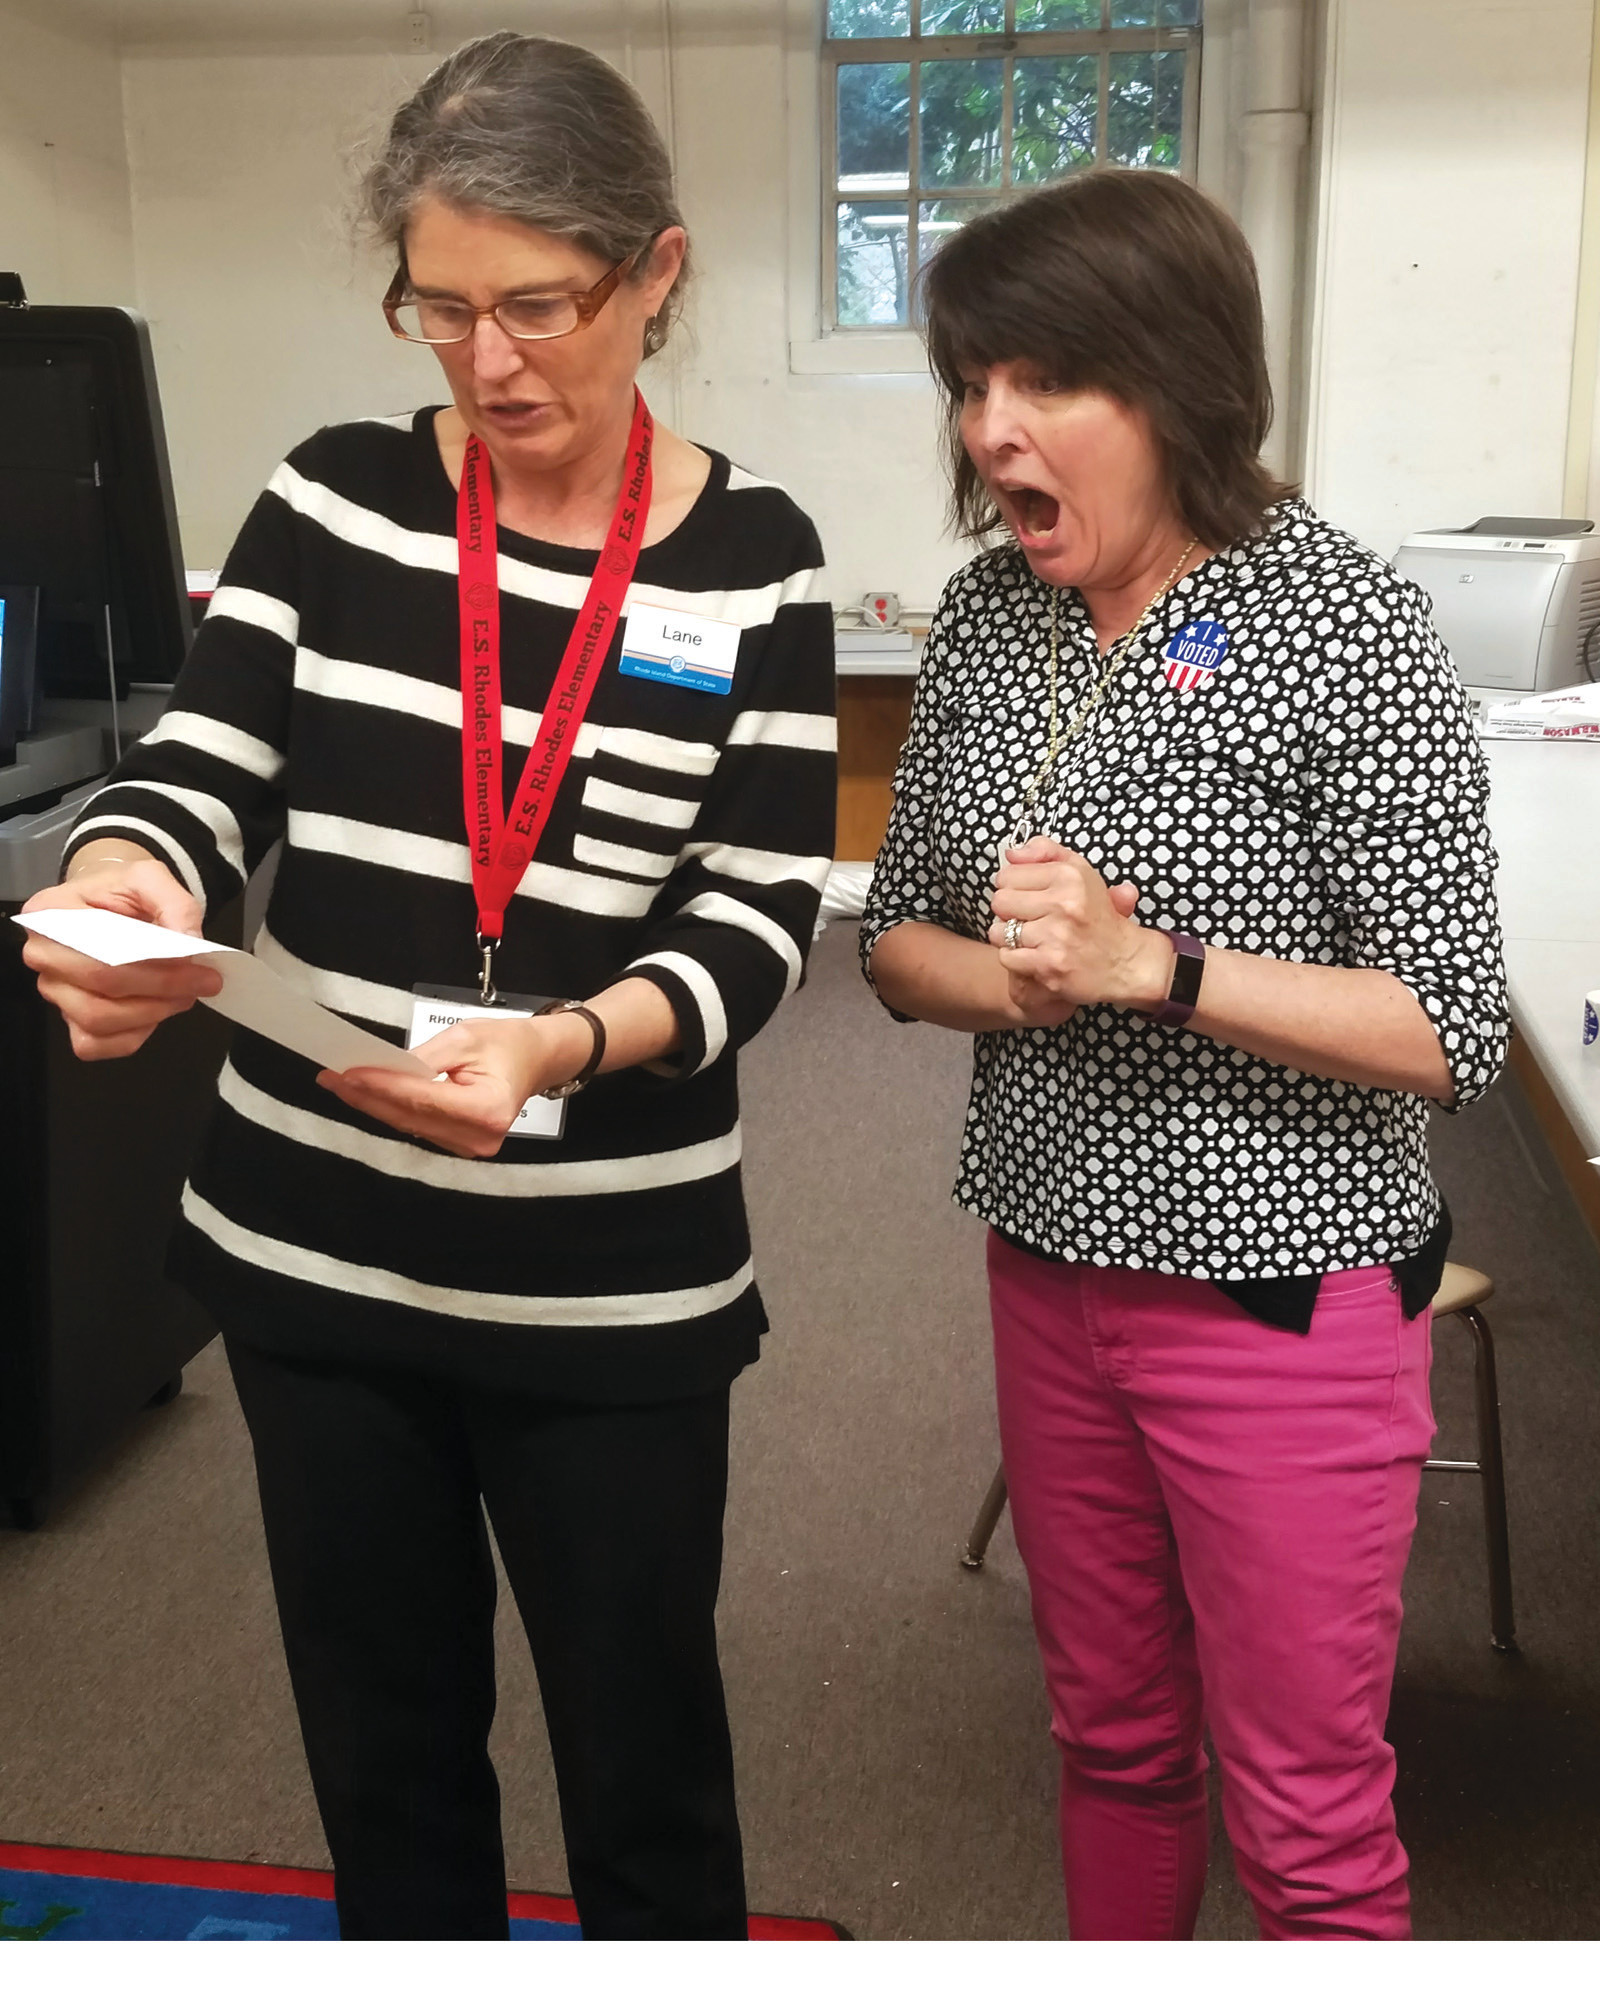 THE VOTES ARE IN: Lane Sparkman, representing the office of the Secretary of State, gives fourth-grade teacher, Susan Weber, the results of the school-wide election. The horseshoe crabs took the win by a landslide, 169 to 40 votes.